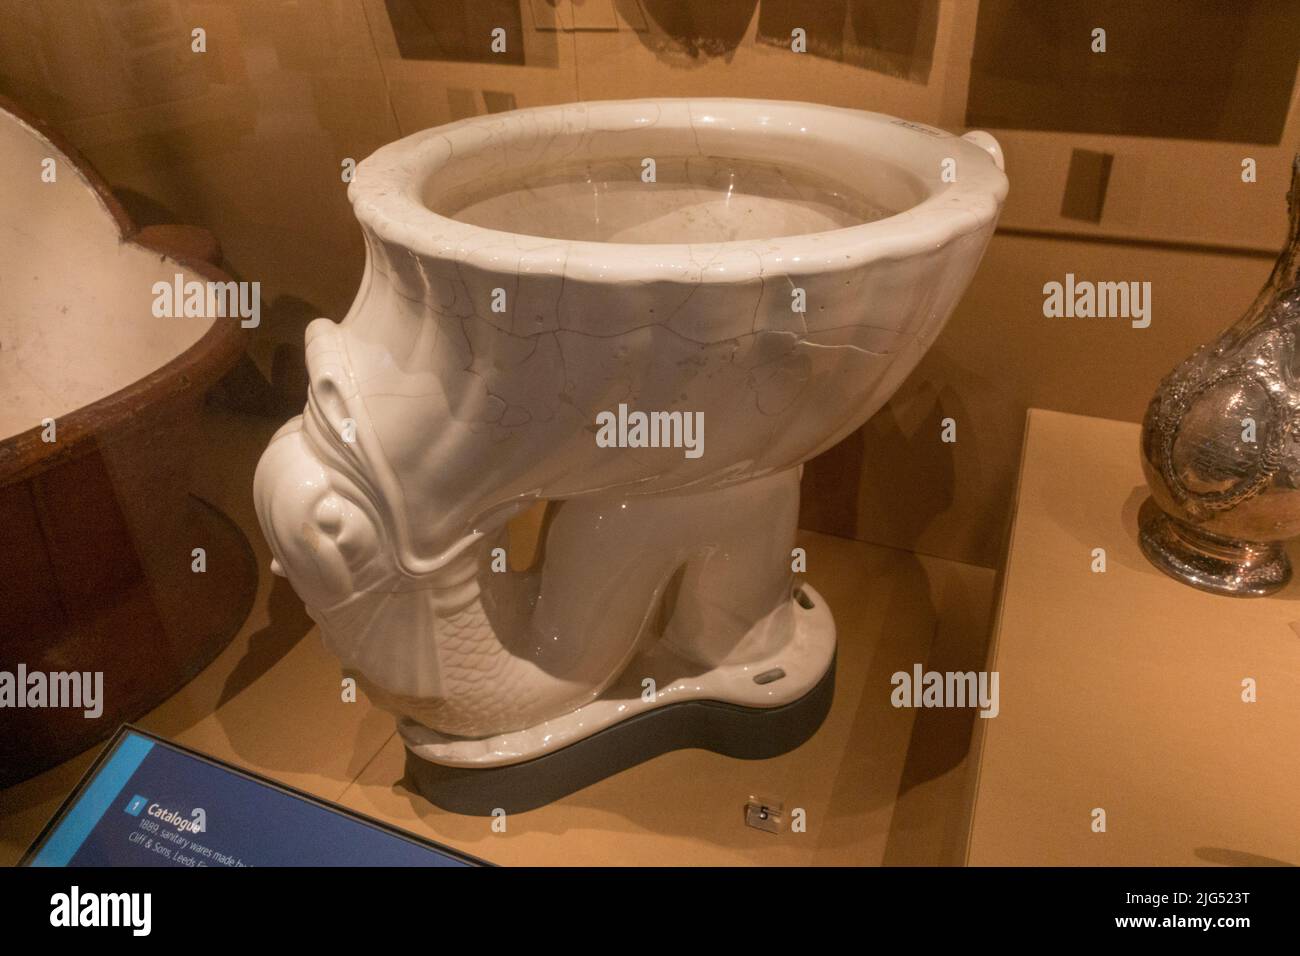 'The Dolphin' toilet made by Edward Johns & Co of Armitage, Staffordshire (1885-95) on display in the UK. Stock Photo